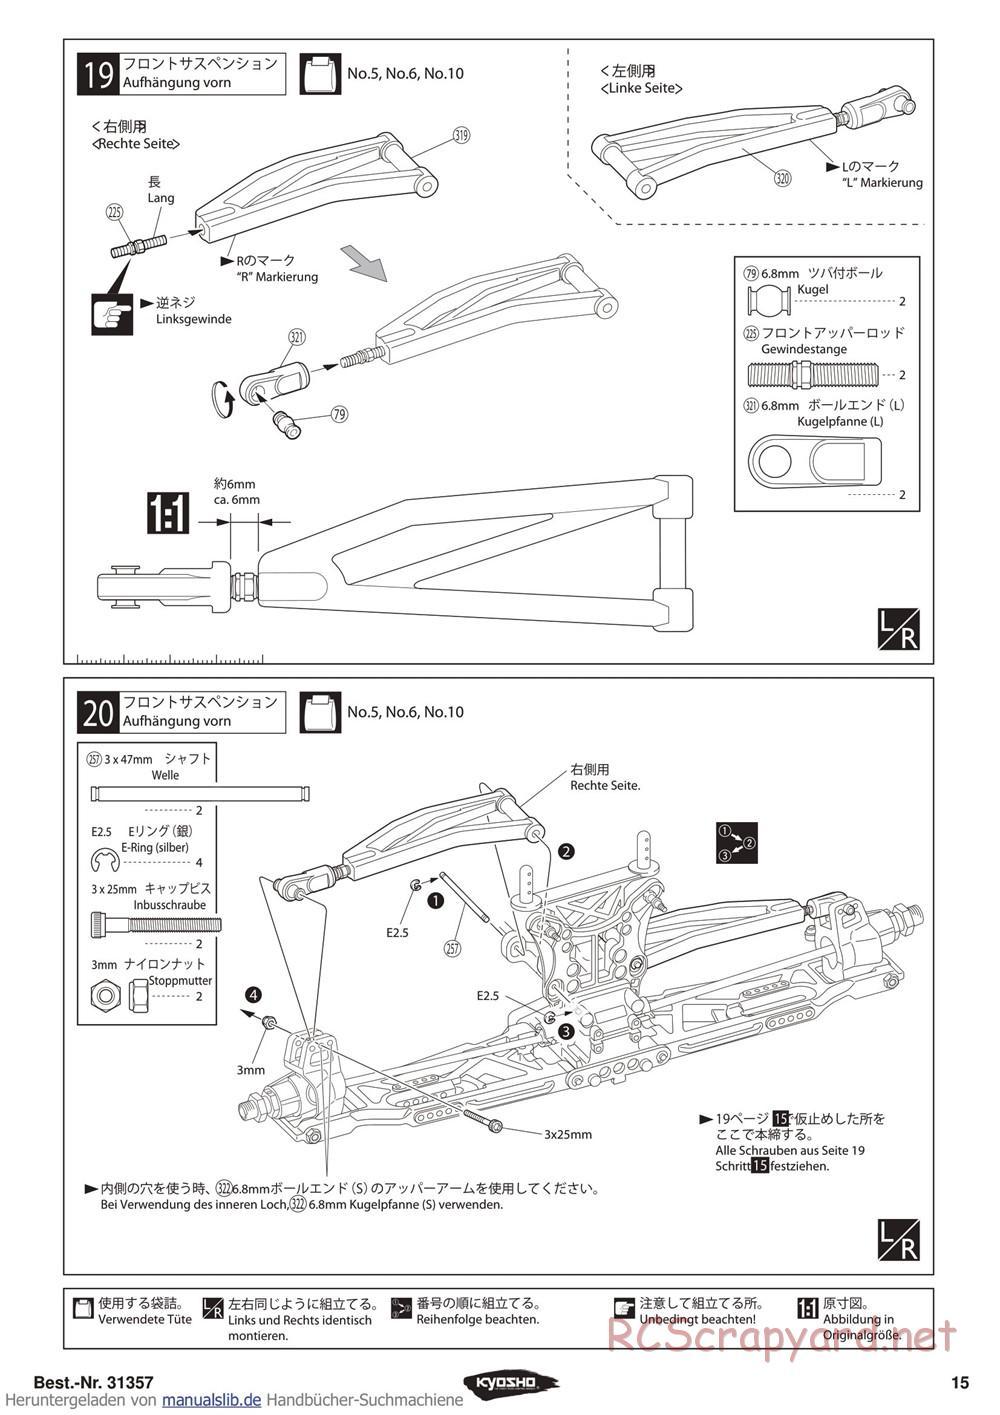 Kyosho - Inferno ST-RR Evo - Manual - Page 15